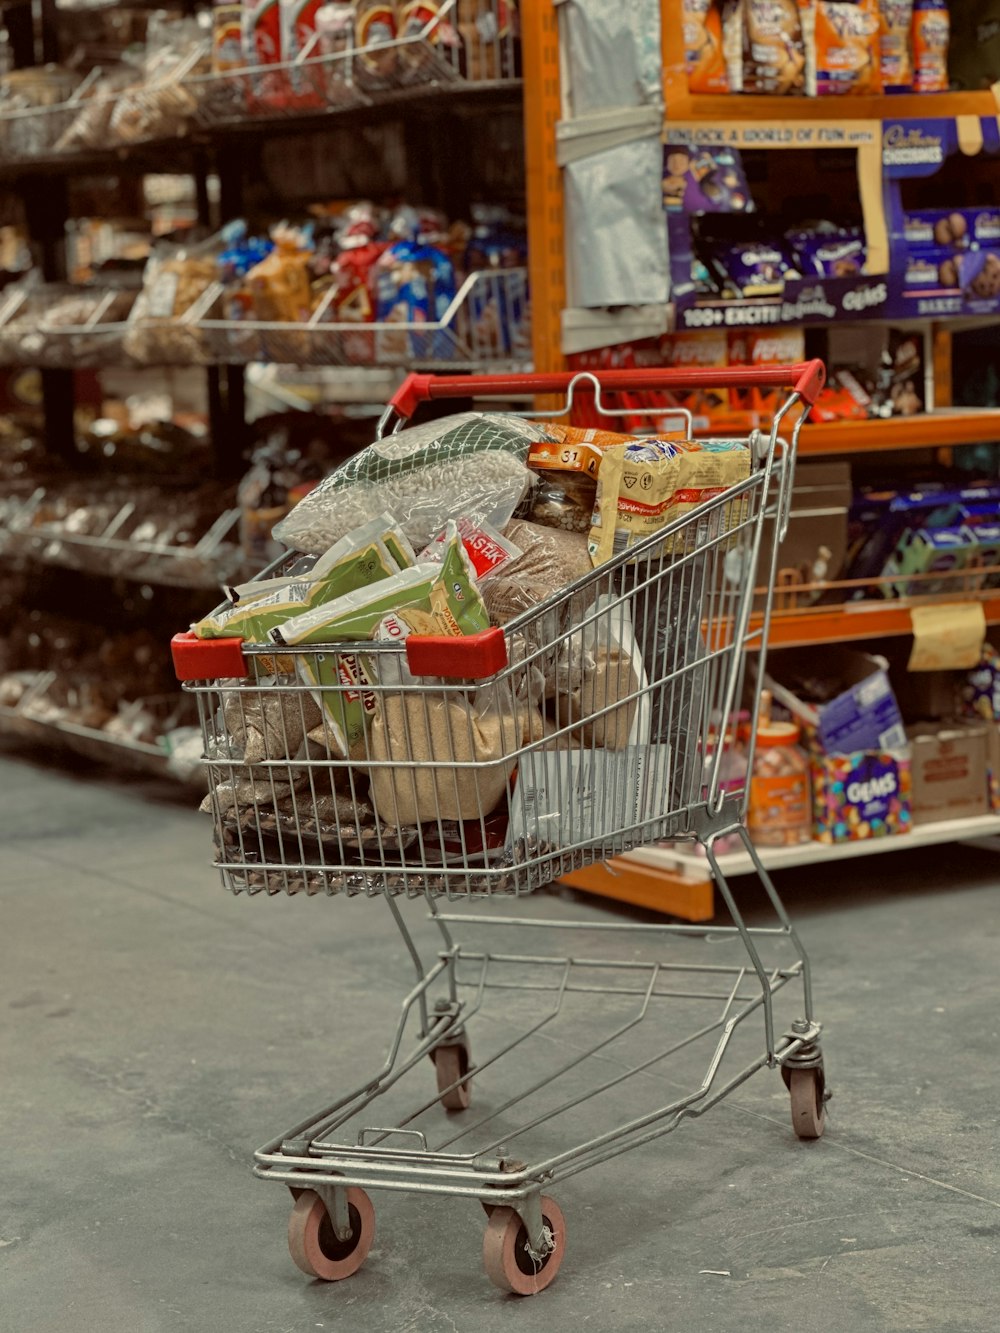 a shopping cart full of groceries in a grocery store